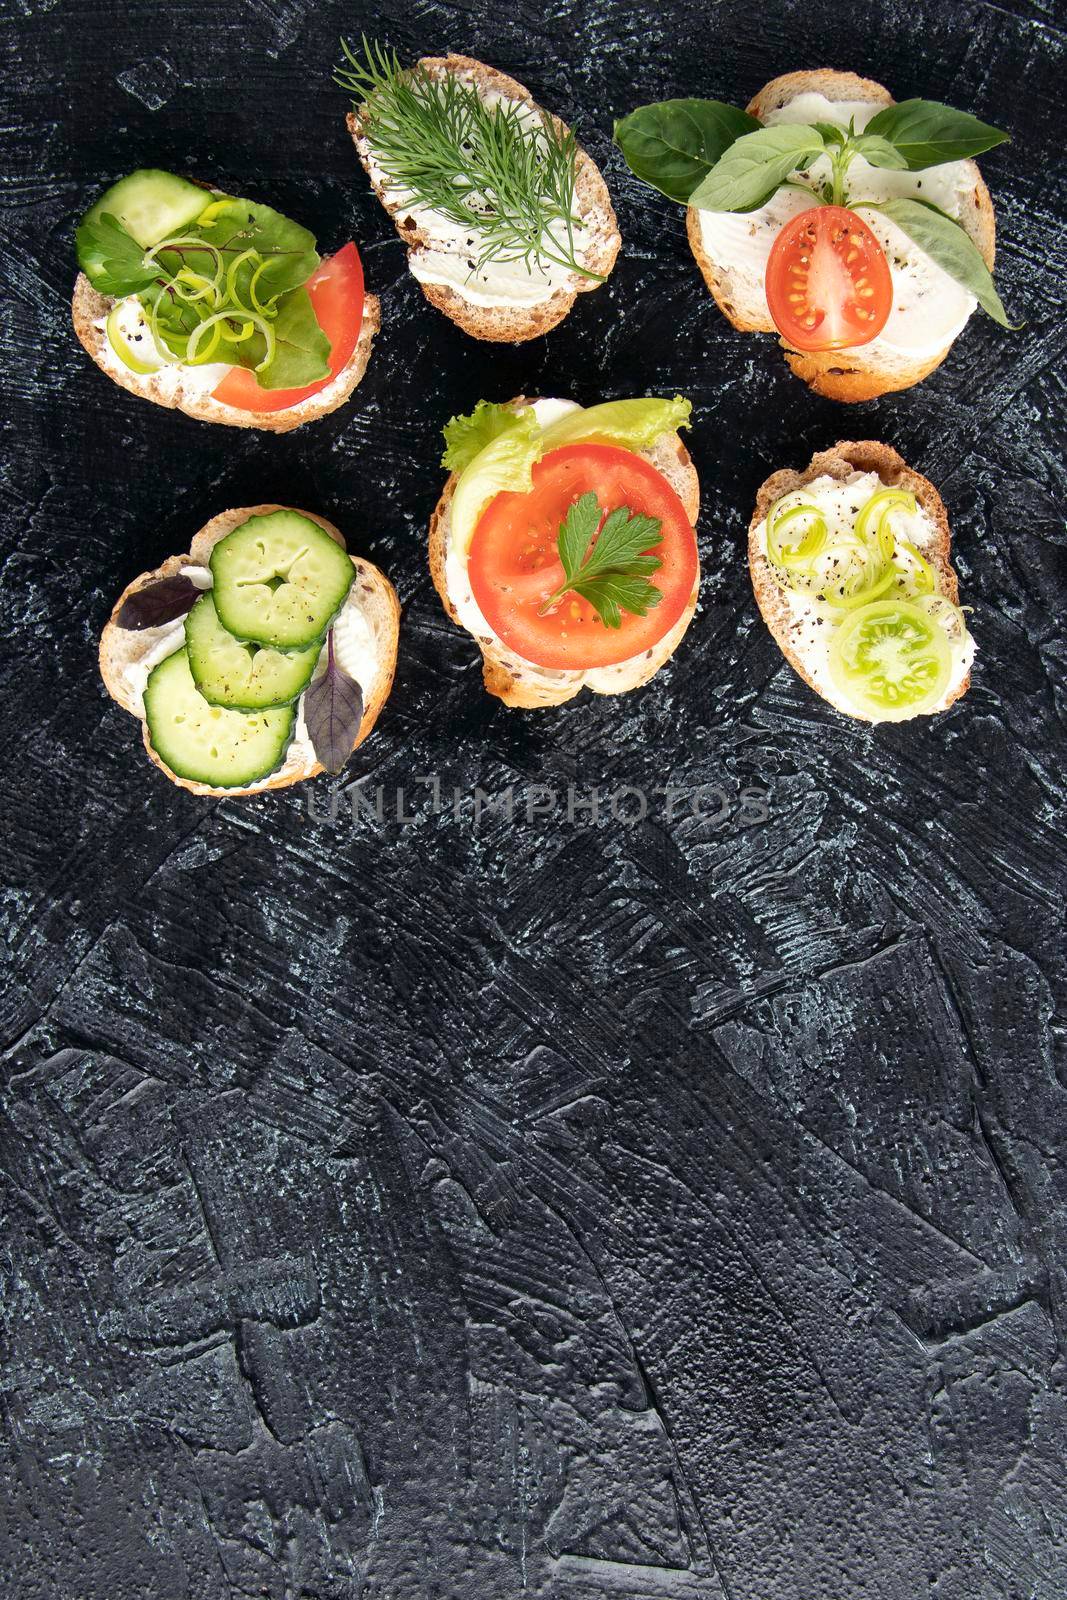 vertical photo with serving vegetarian sandwiches for appetizers on black textured background. various vegetable sandwiches with cream cheese, tomatoes, dill, cucumbers, leeks and basil. copy space